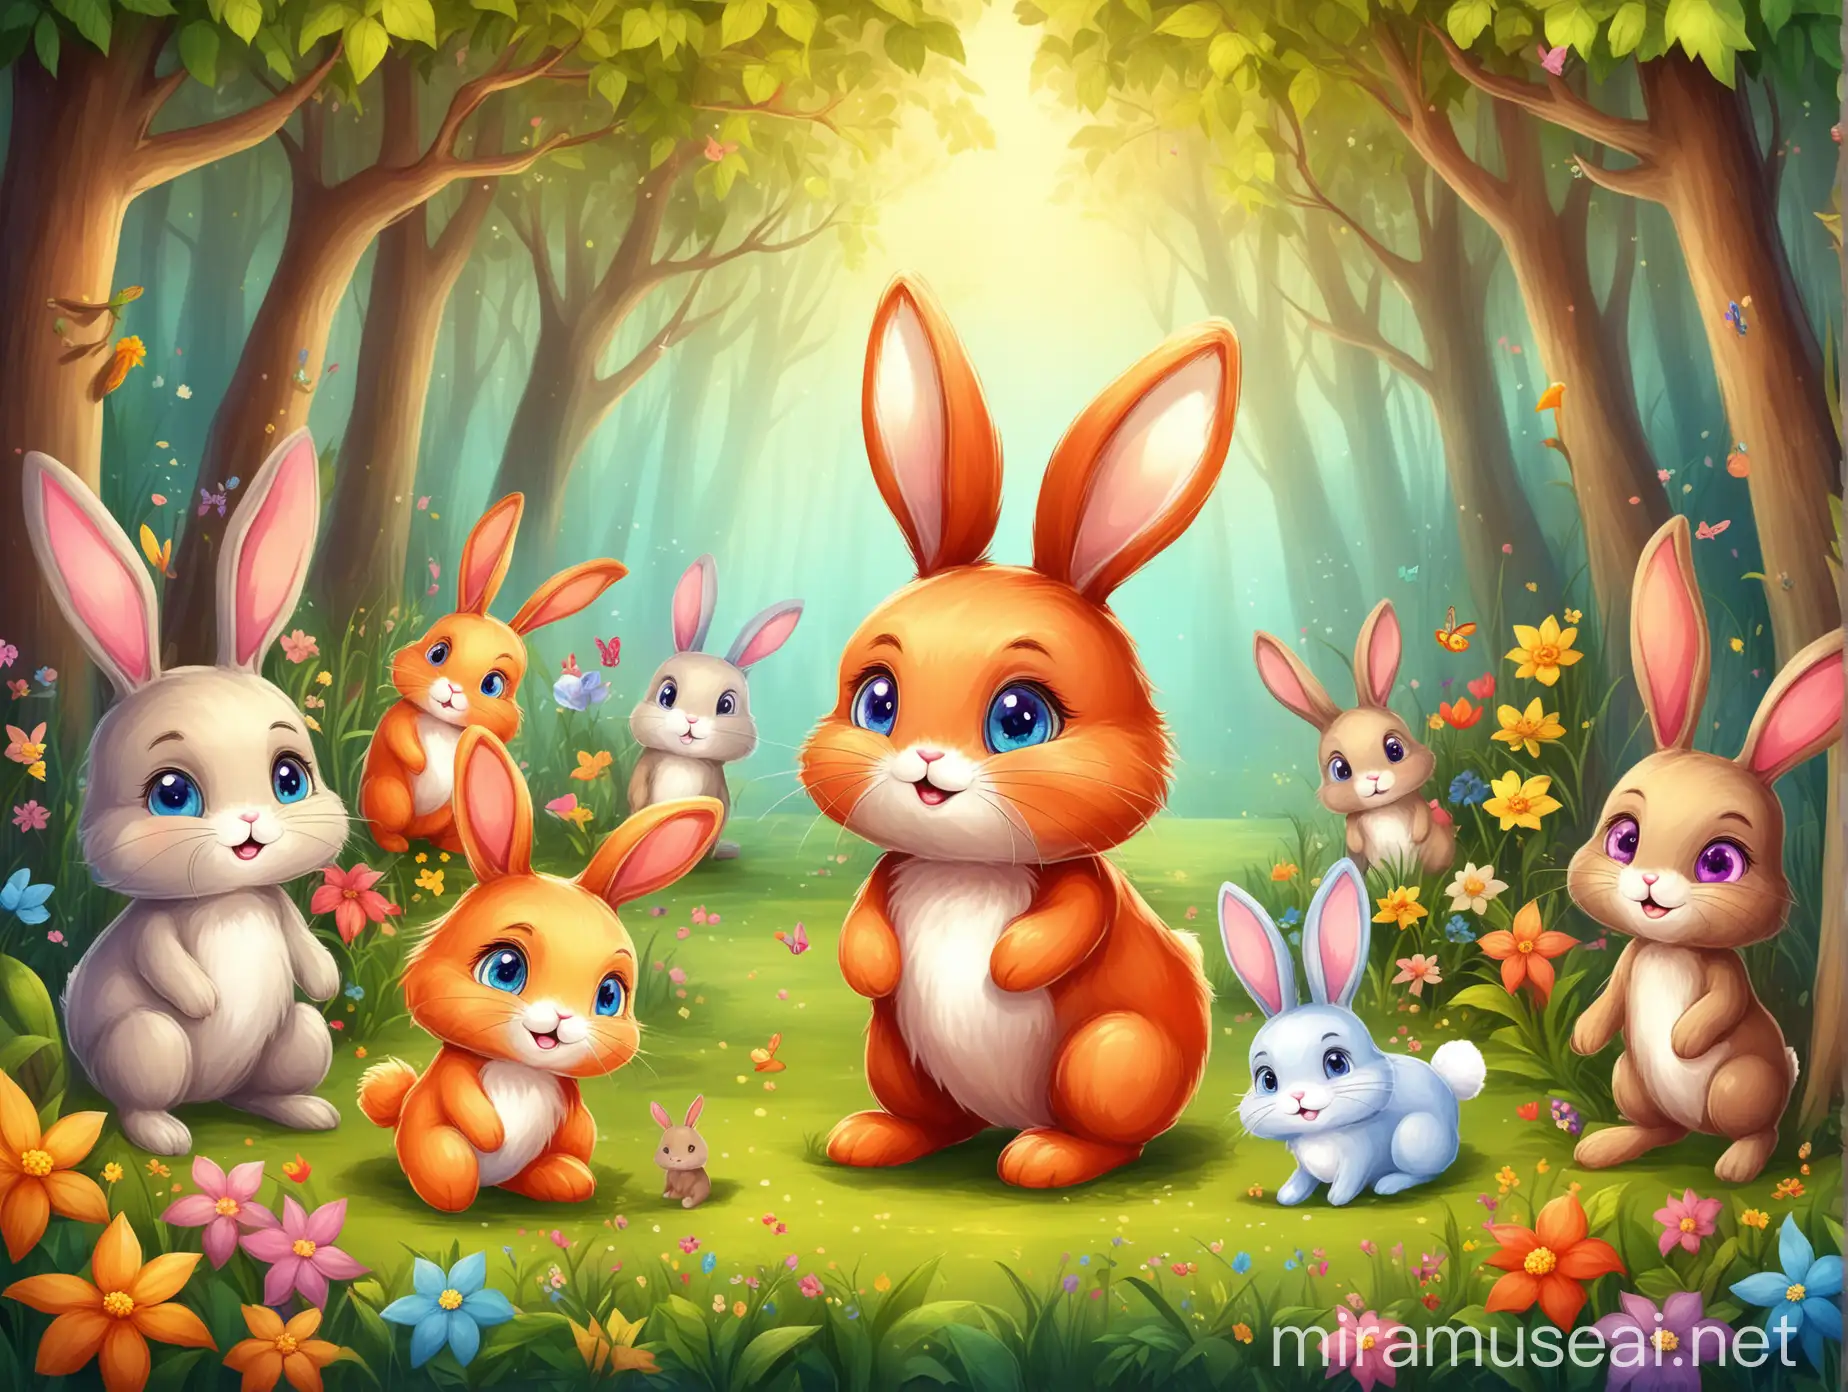 Friendly Bunny in Vibrant Forest Delightful Childrens Illustration